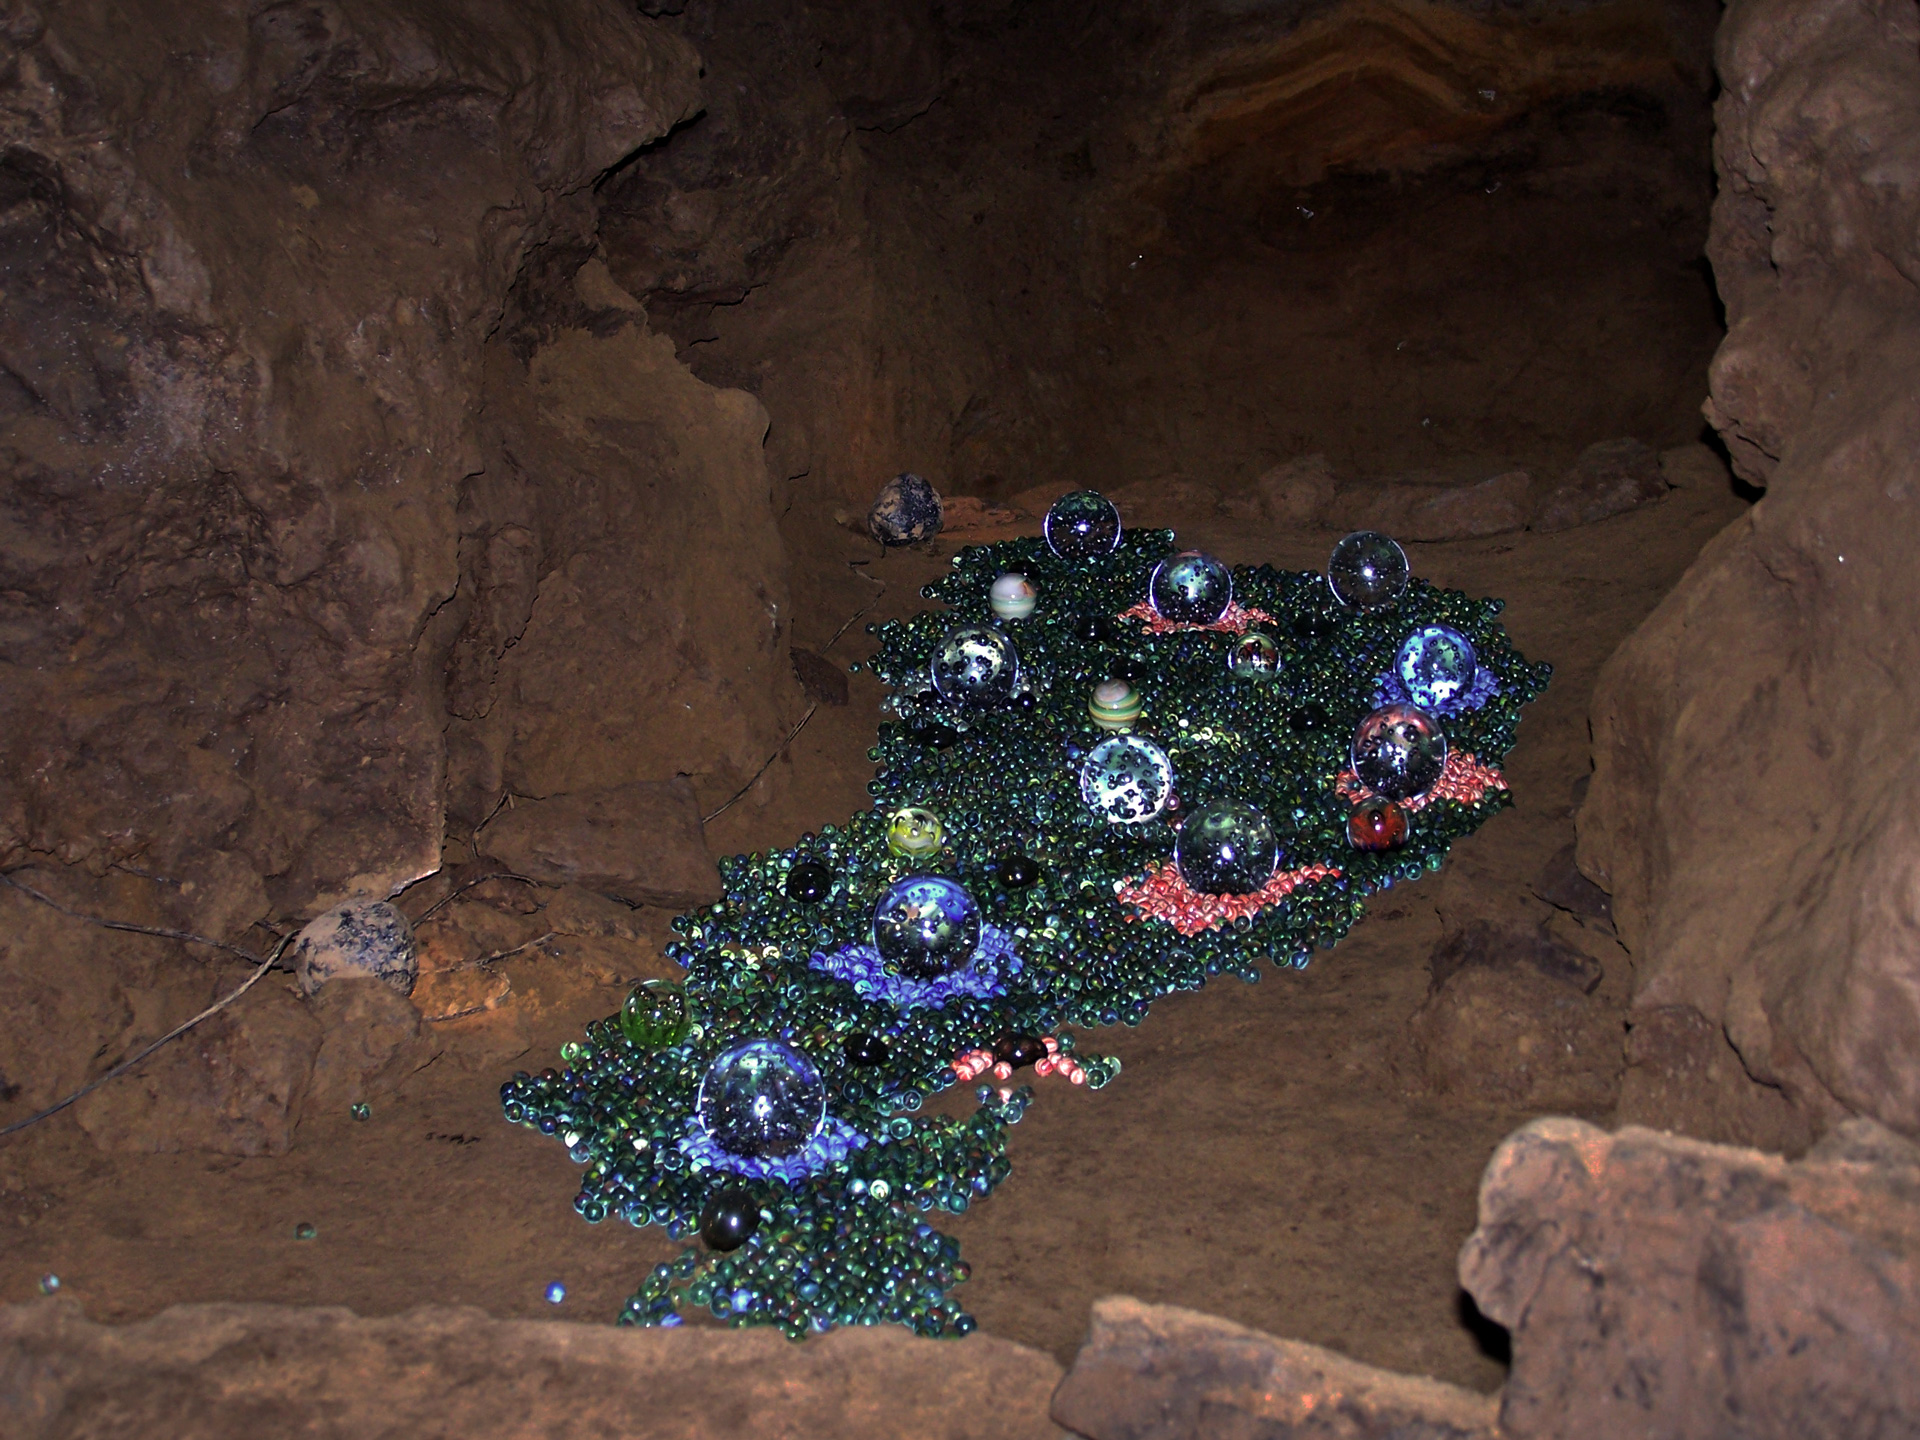 Cell Spheres in the Cave Landscape